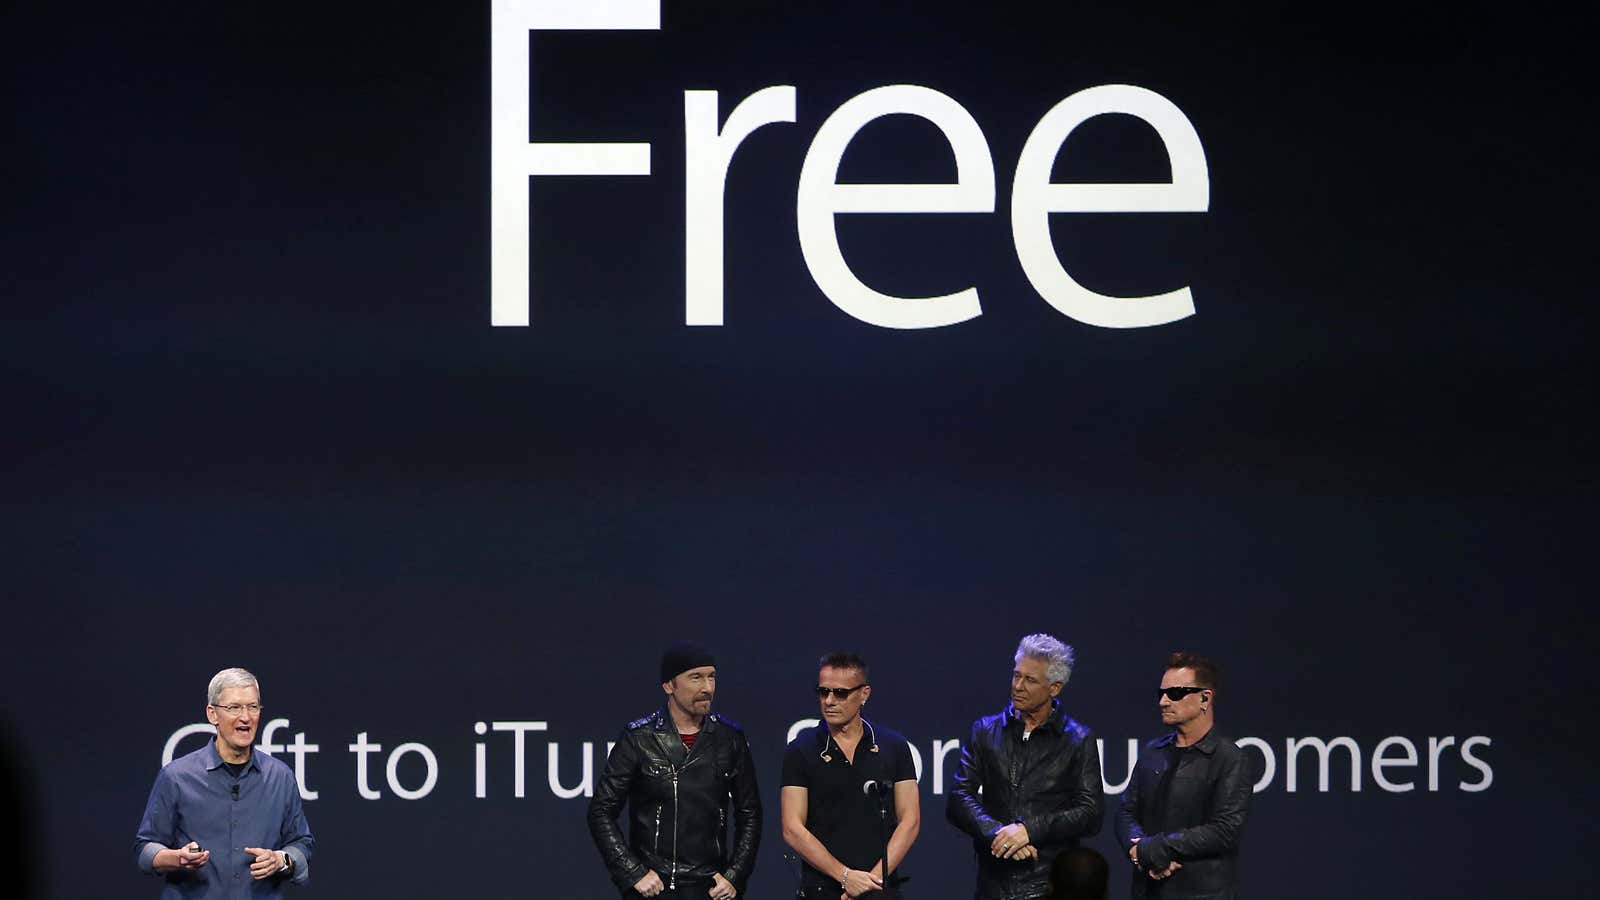 Apple CEO Tim Cook (L) stands with Irish rock band U2 as he speaks during an Apple event announcing the iPhone 6 and the Apple…